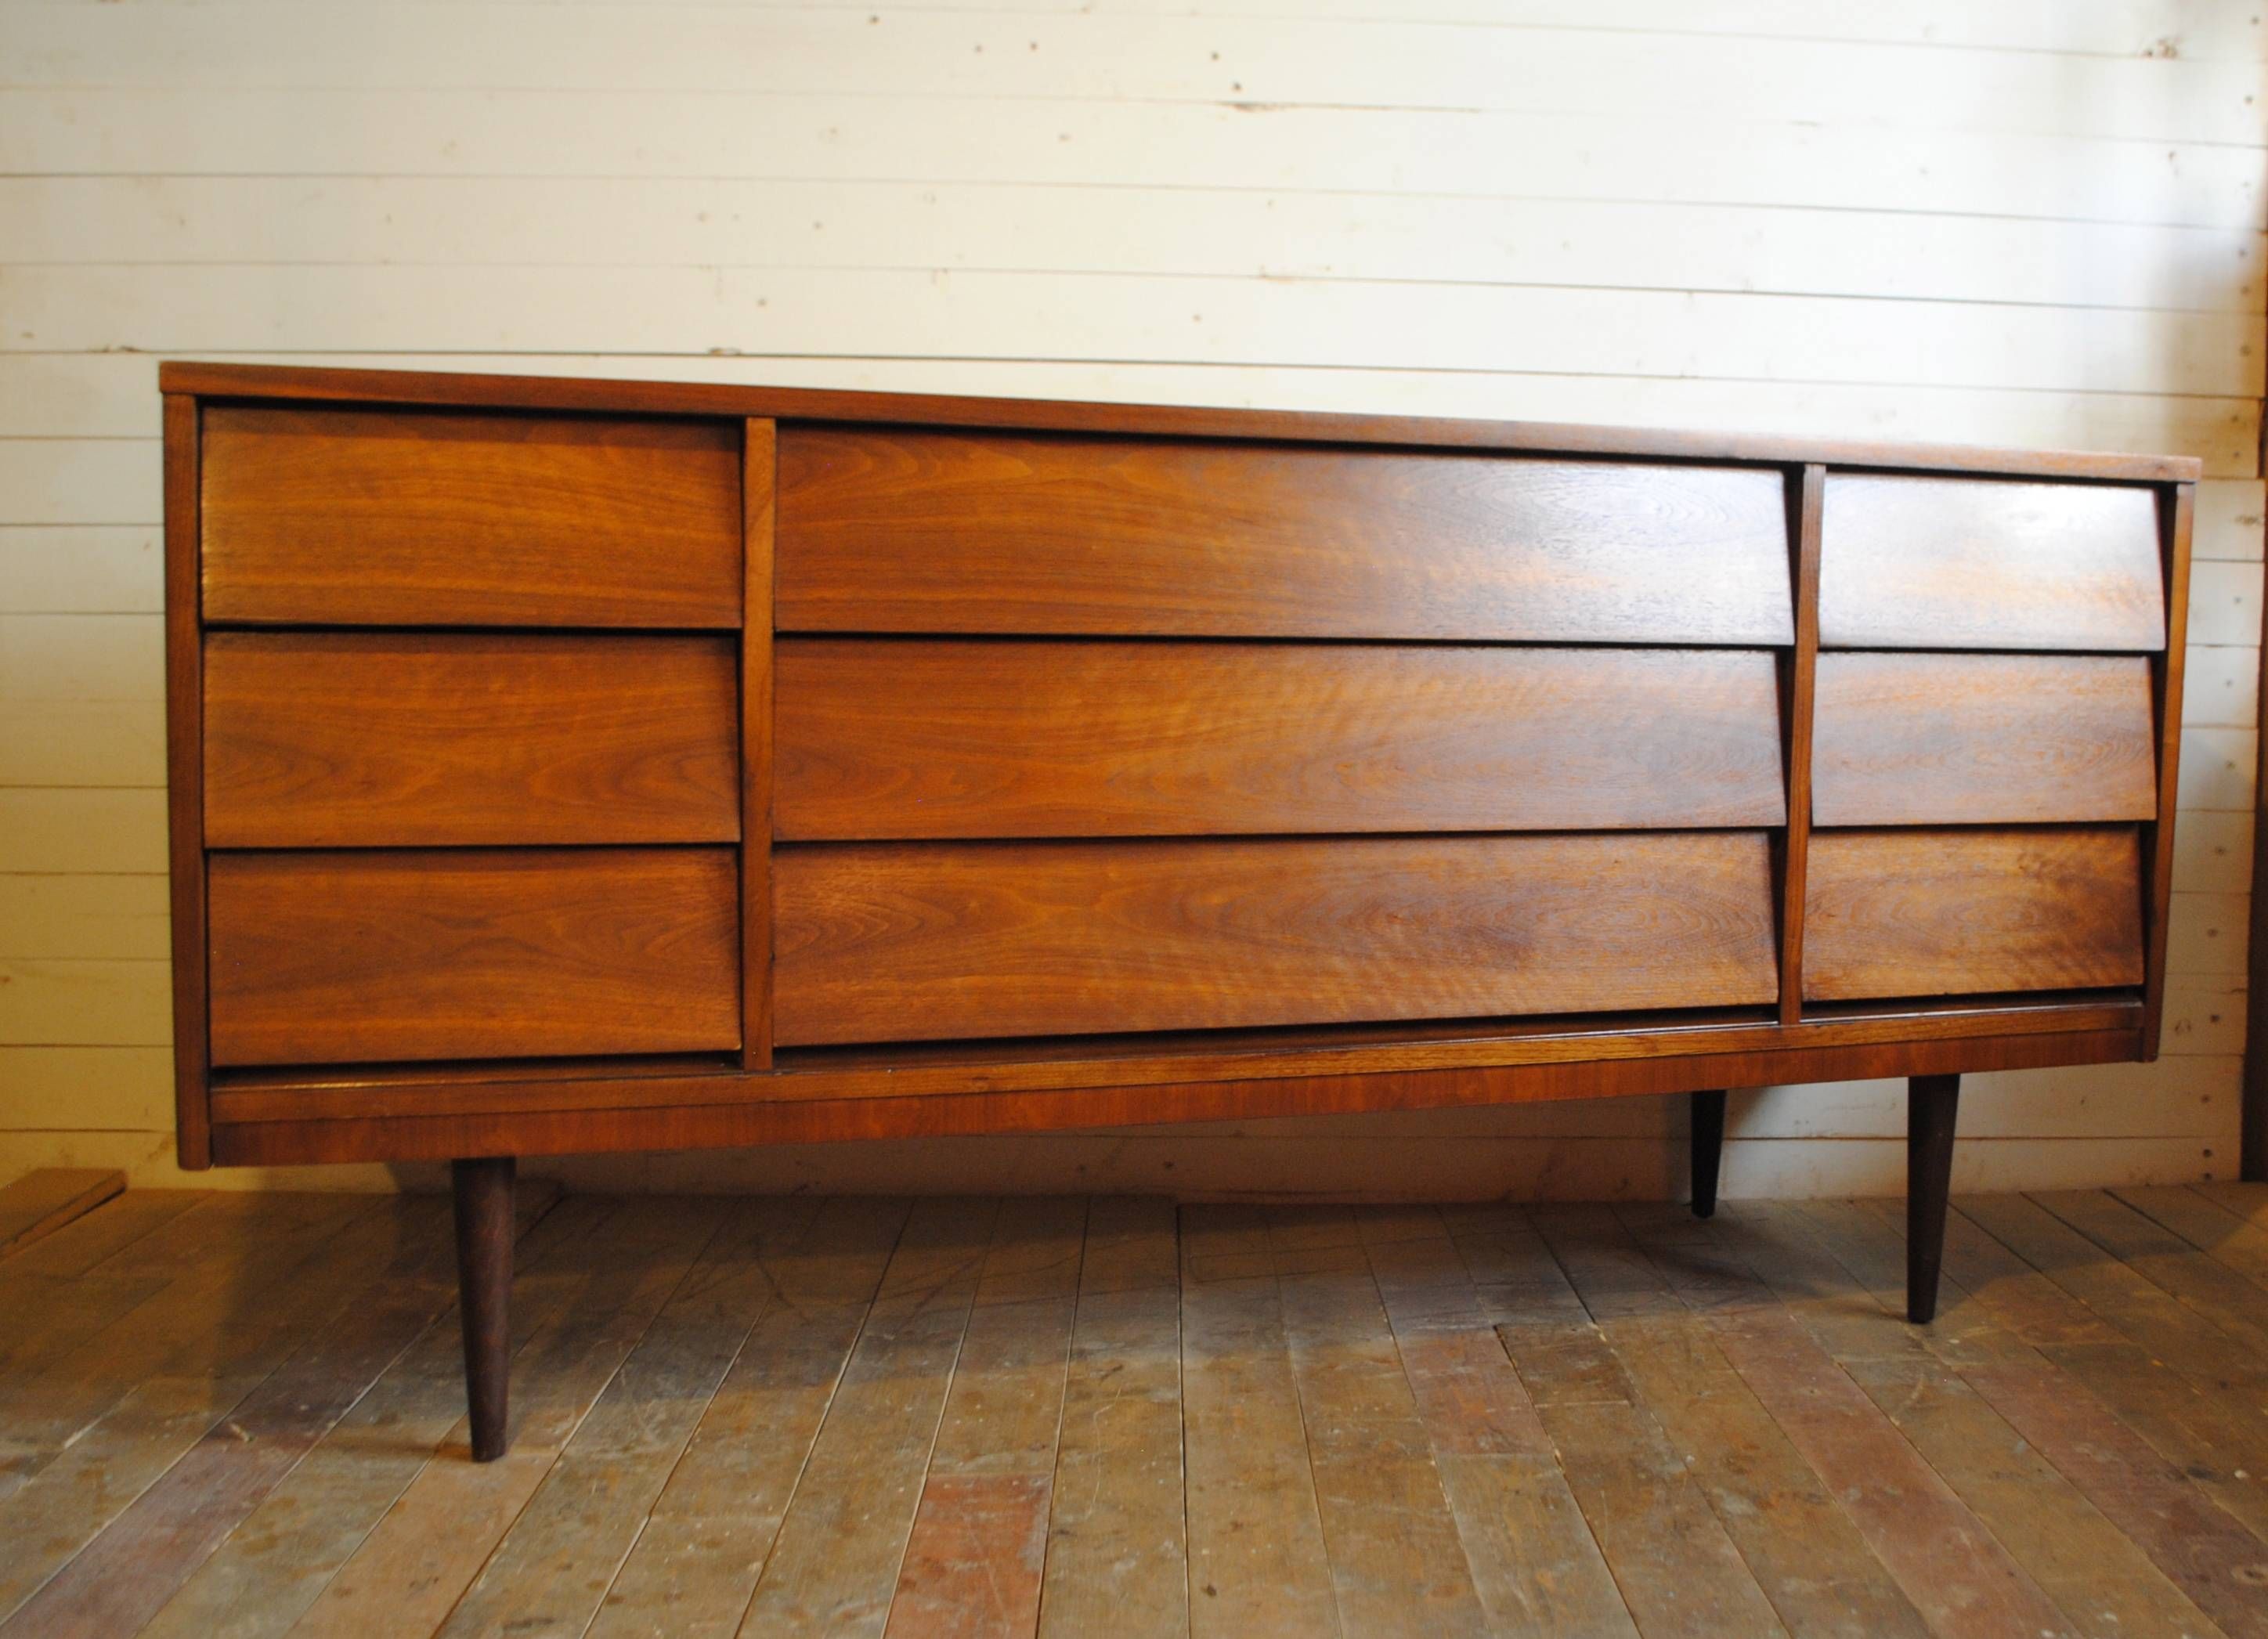 Credenzas And Sideboards Best Of At Modern Credenzas Sideboards Pertaining To Recent Credenzas And Sideboards (View 8 of 15)